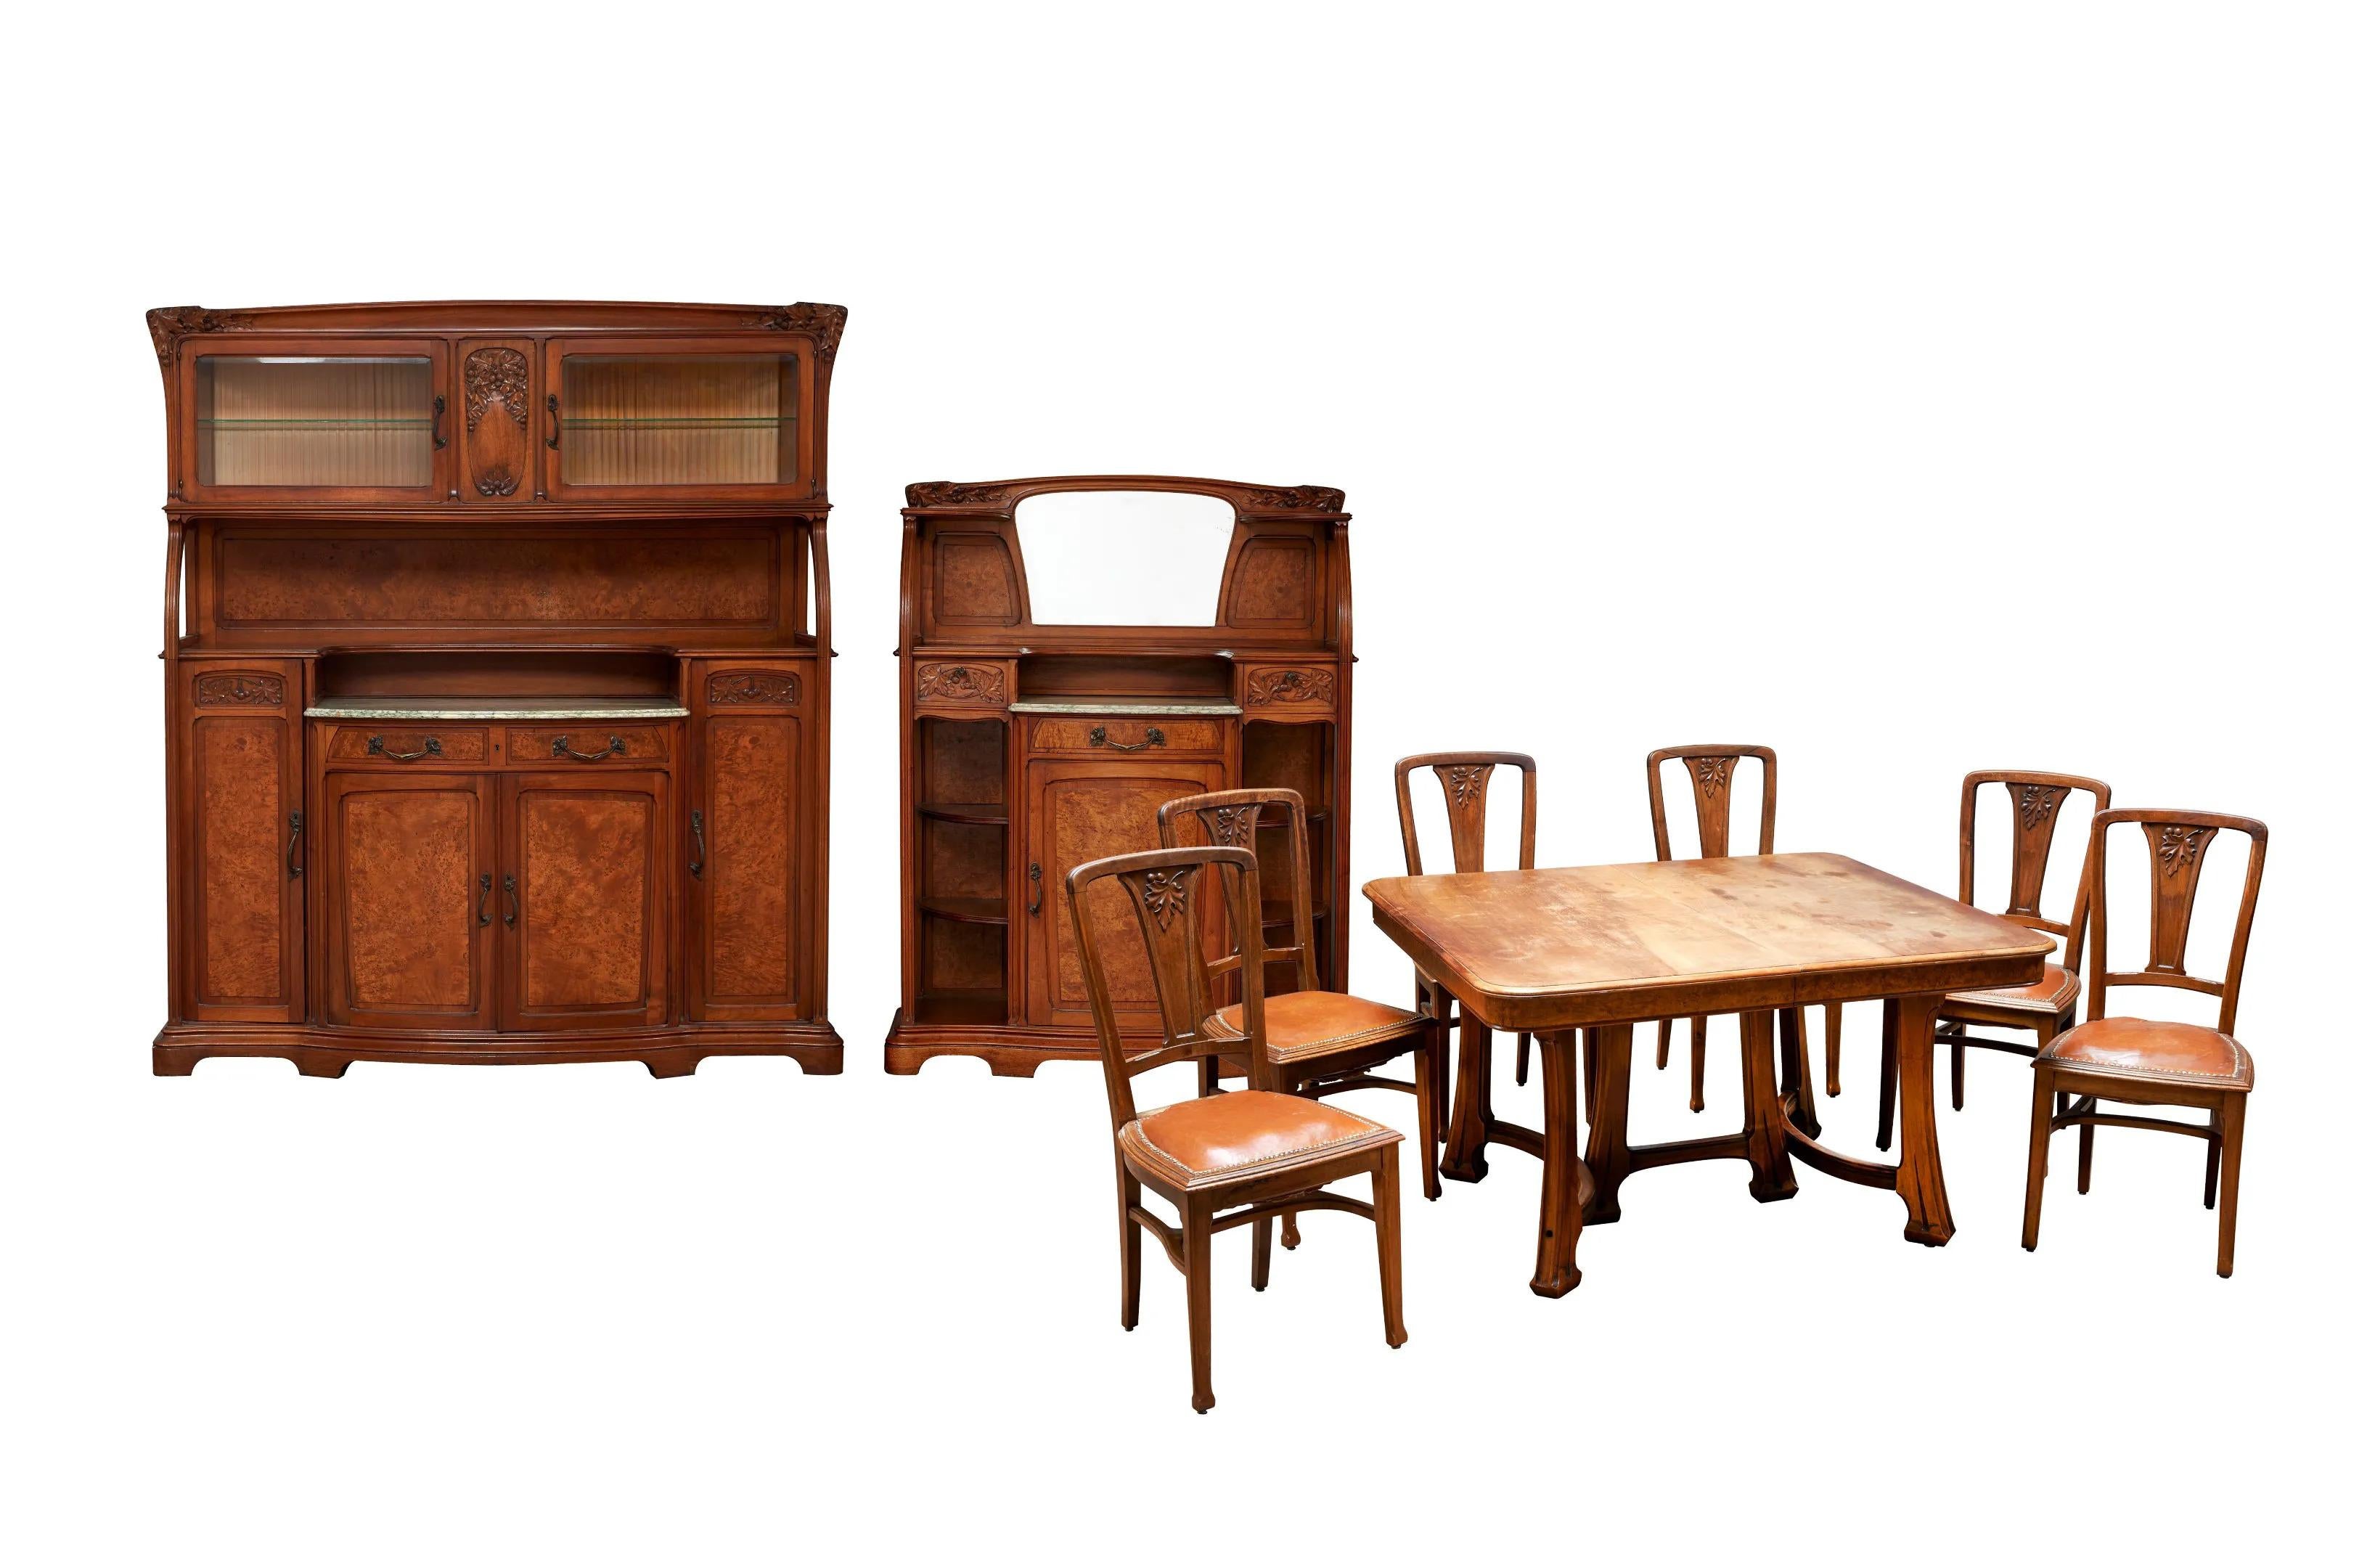 French  Gauthier-Poinsignon & Cie, Art Nouveau Dining Room Furniture in Walnut and Elm For Sale